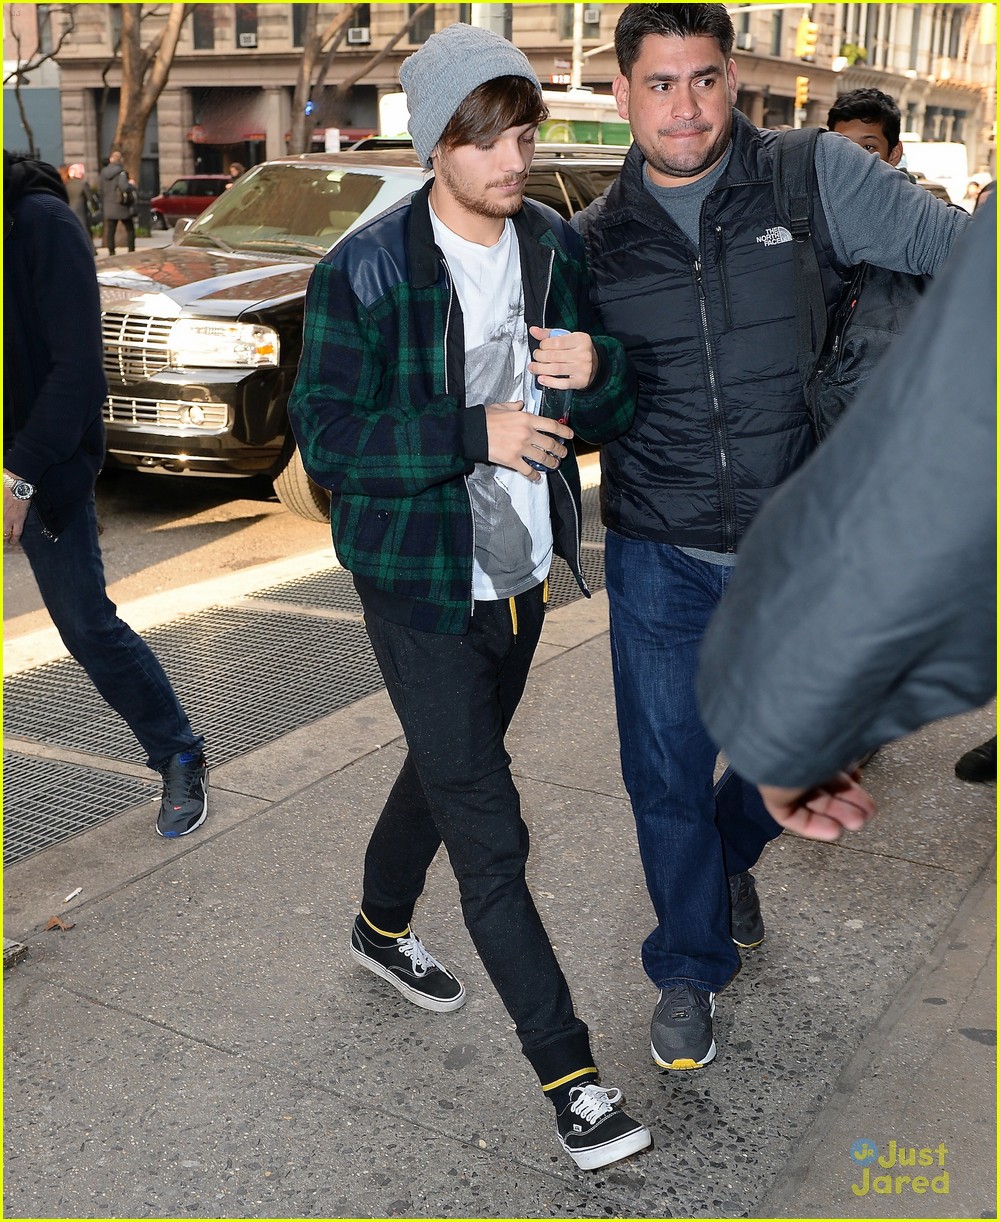 Louis Tomlinson 'One Direction' arriving at a recording studio in